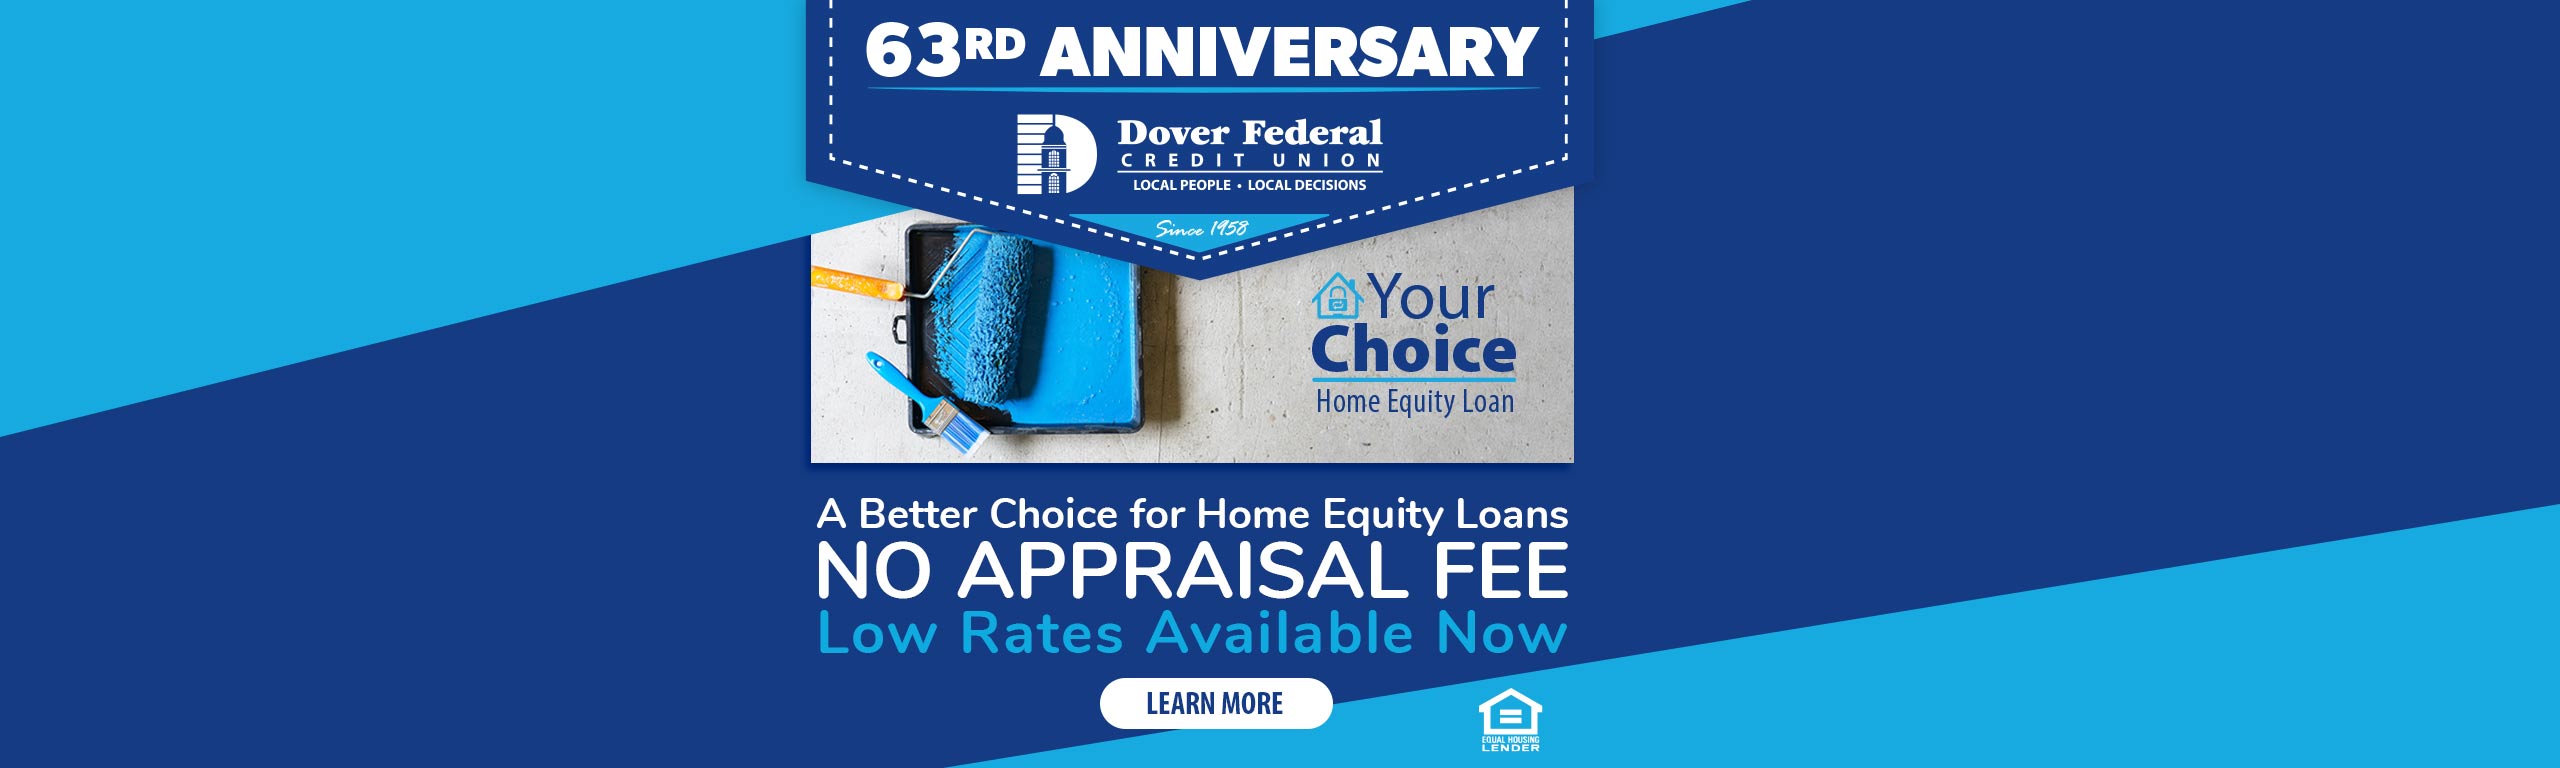 63 Anniversary Promo: A better choice for Home Equity Loans. No Appraisal Fee. Low Rates Available Now.